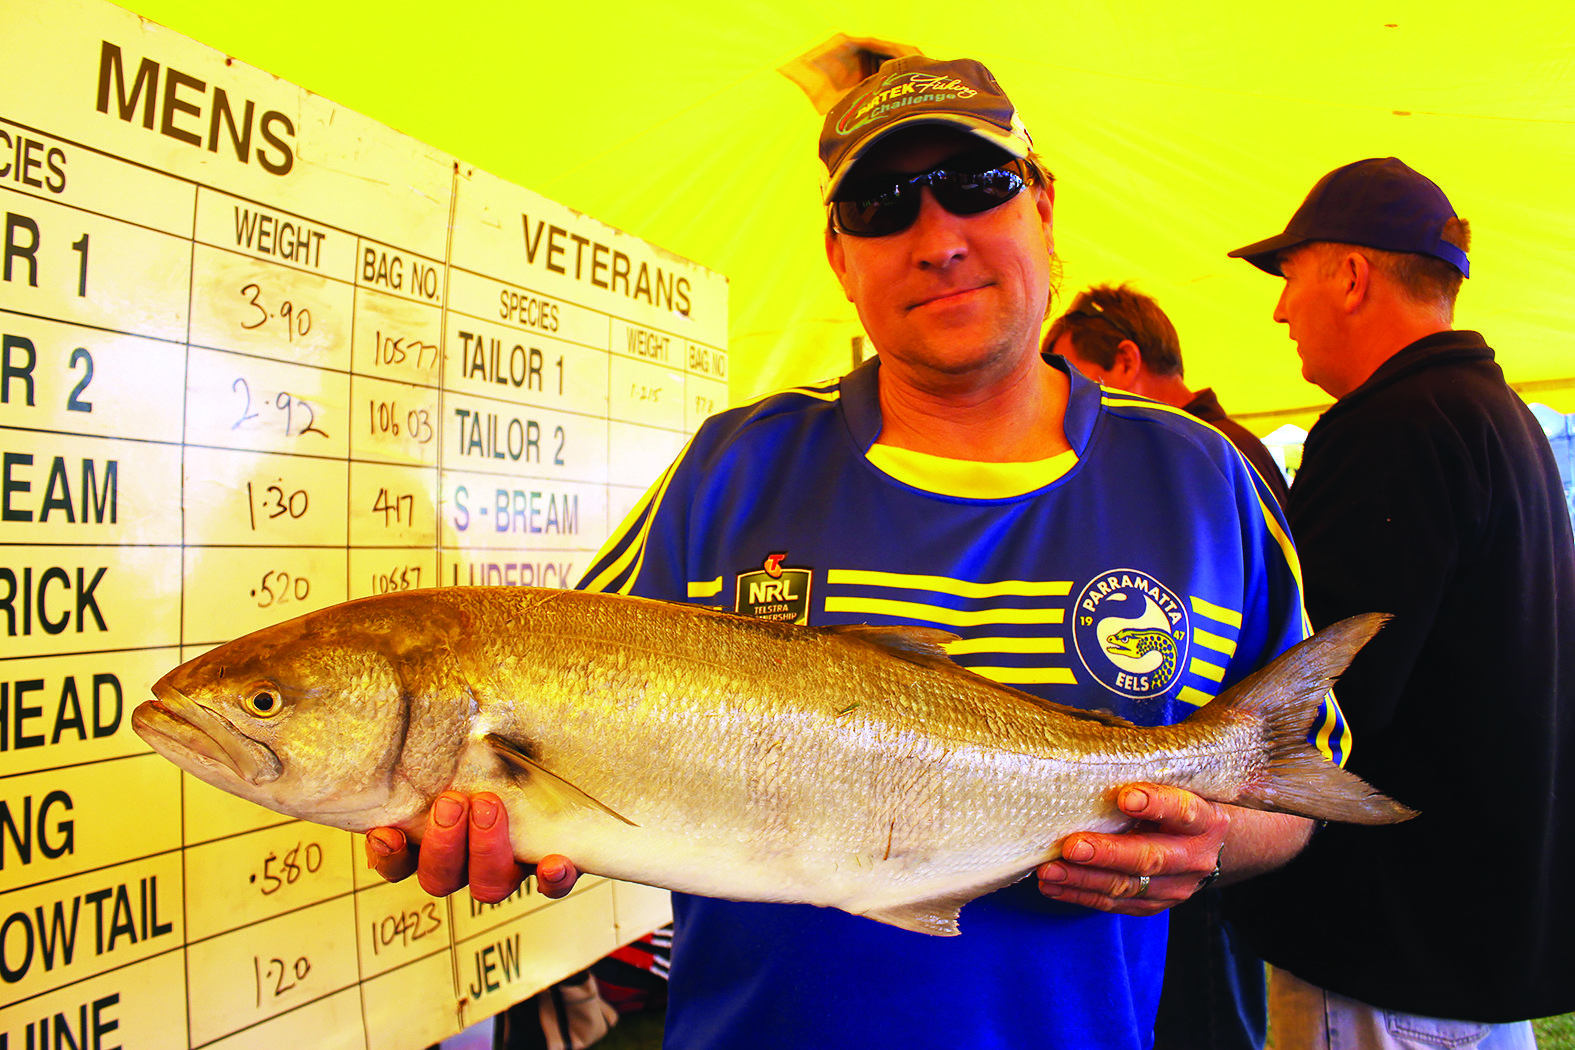 The heaviest tailor was a 3.9kg specimen caught by Kerry Bussian. 